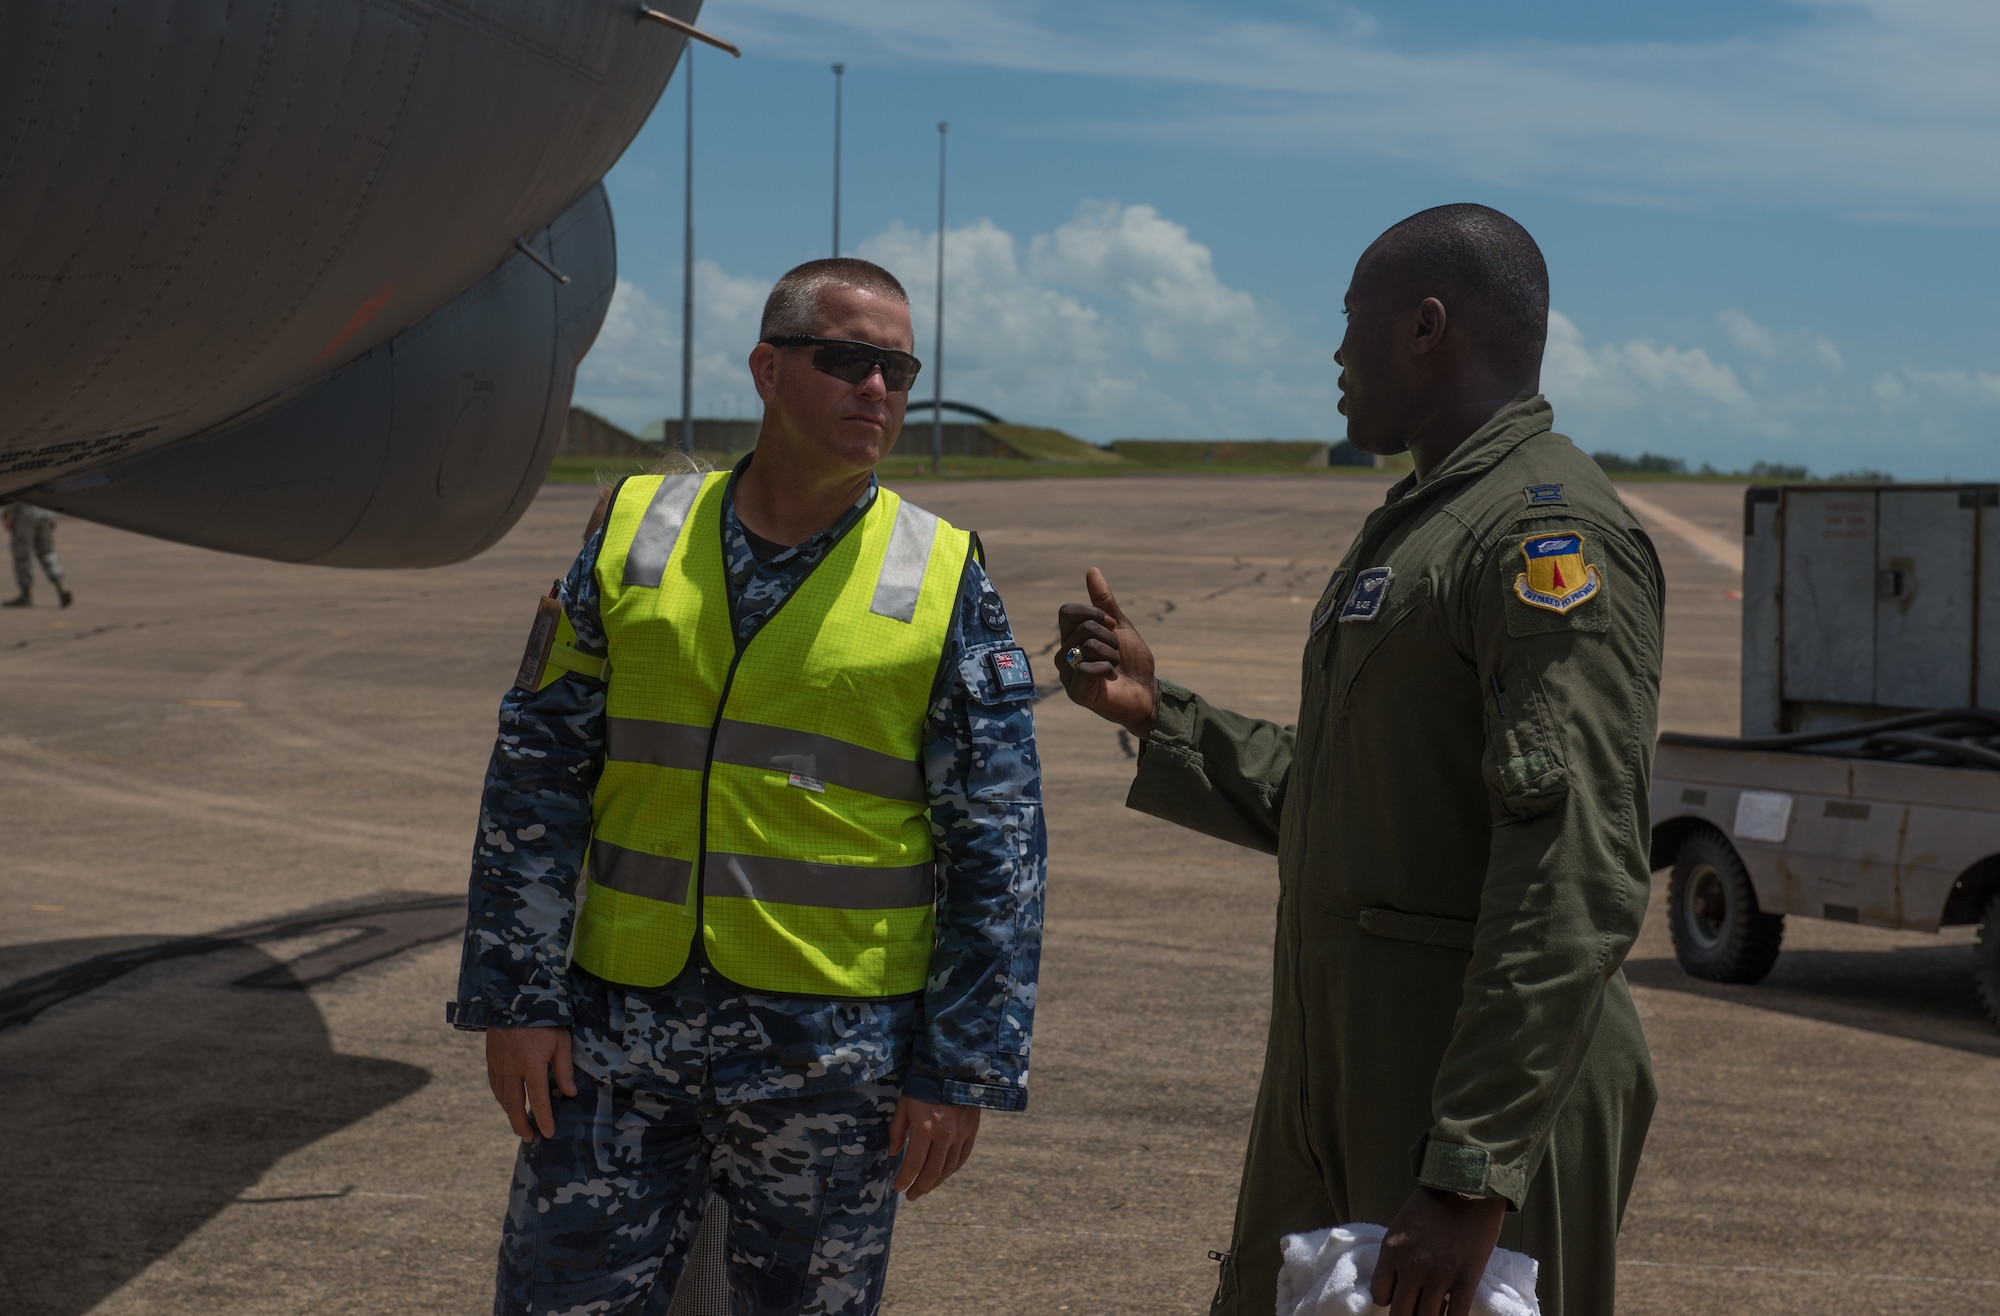 U.S. forces intergrate with Australian during EAC at RAAF base Darwin